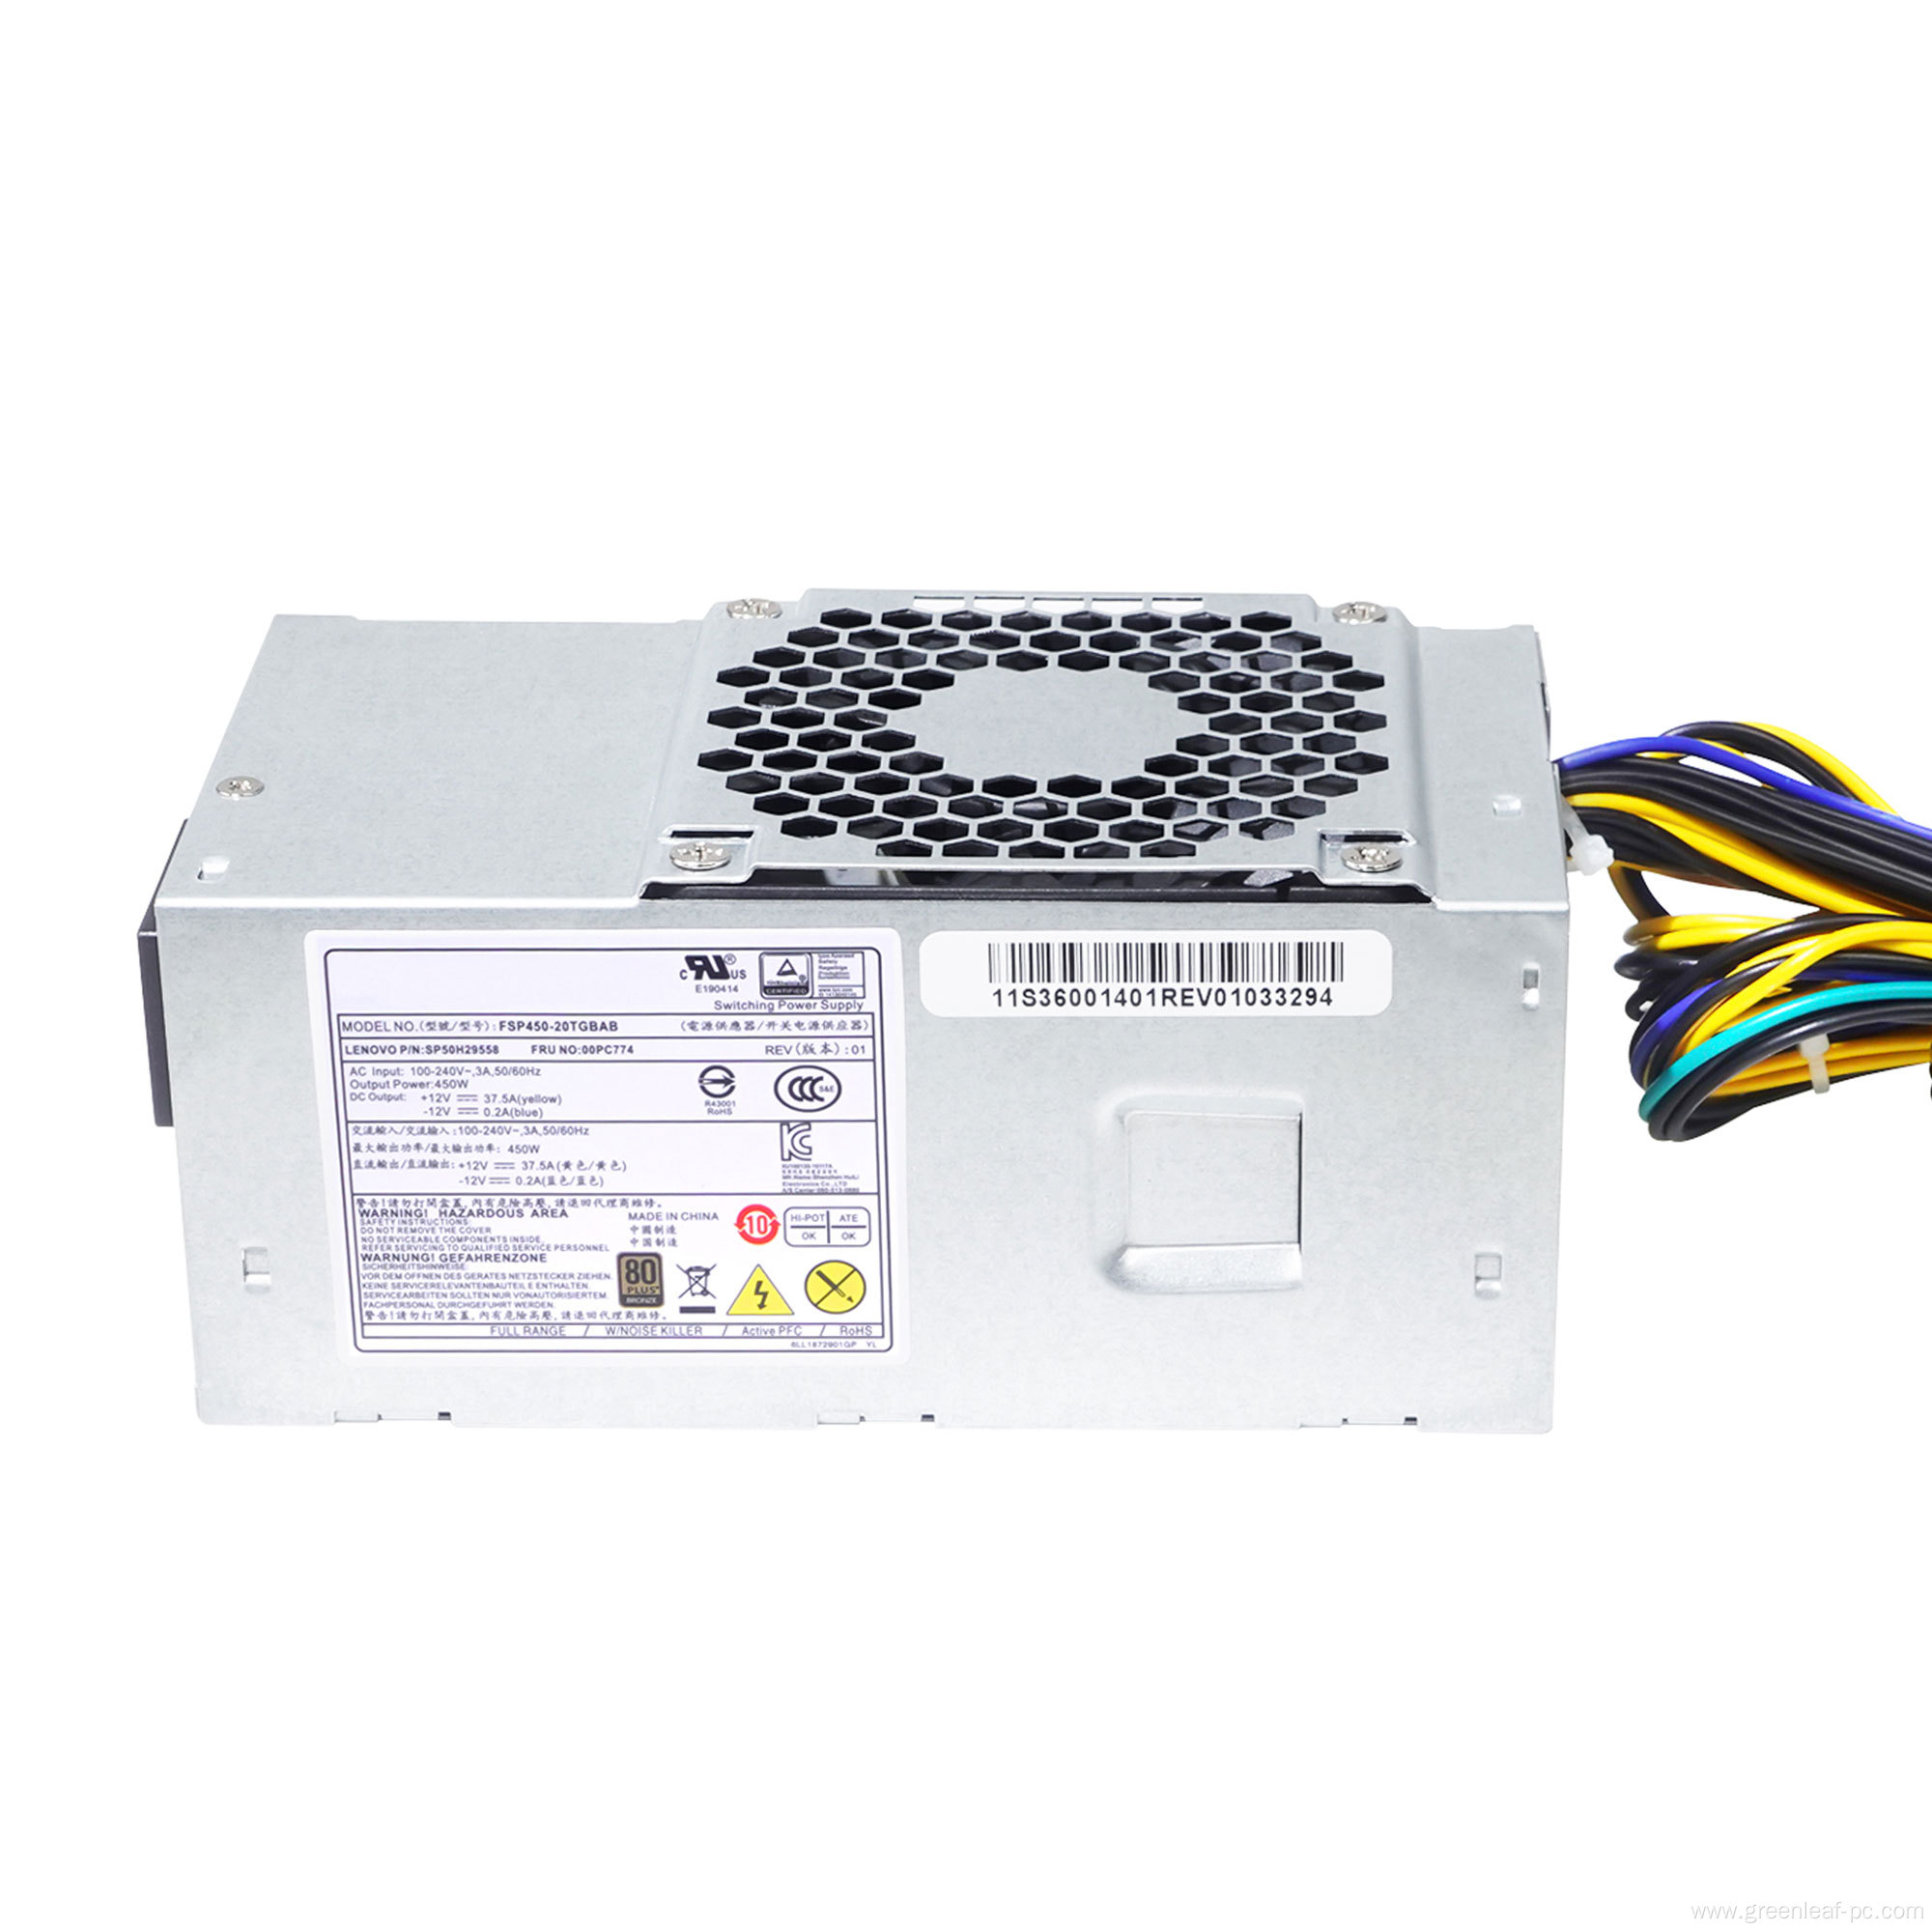 Active PFC TFX 450W switching power supply